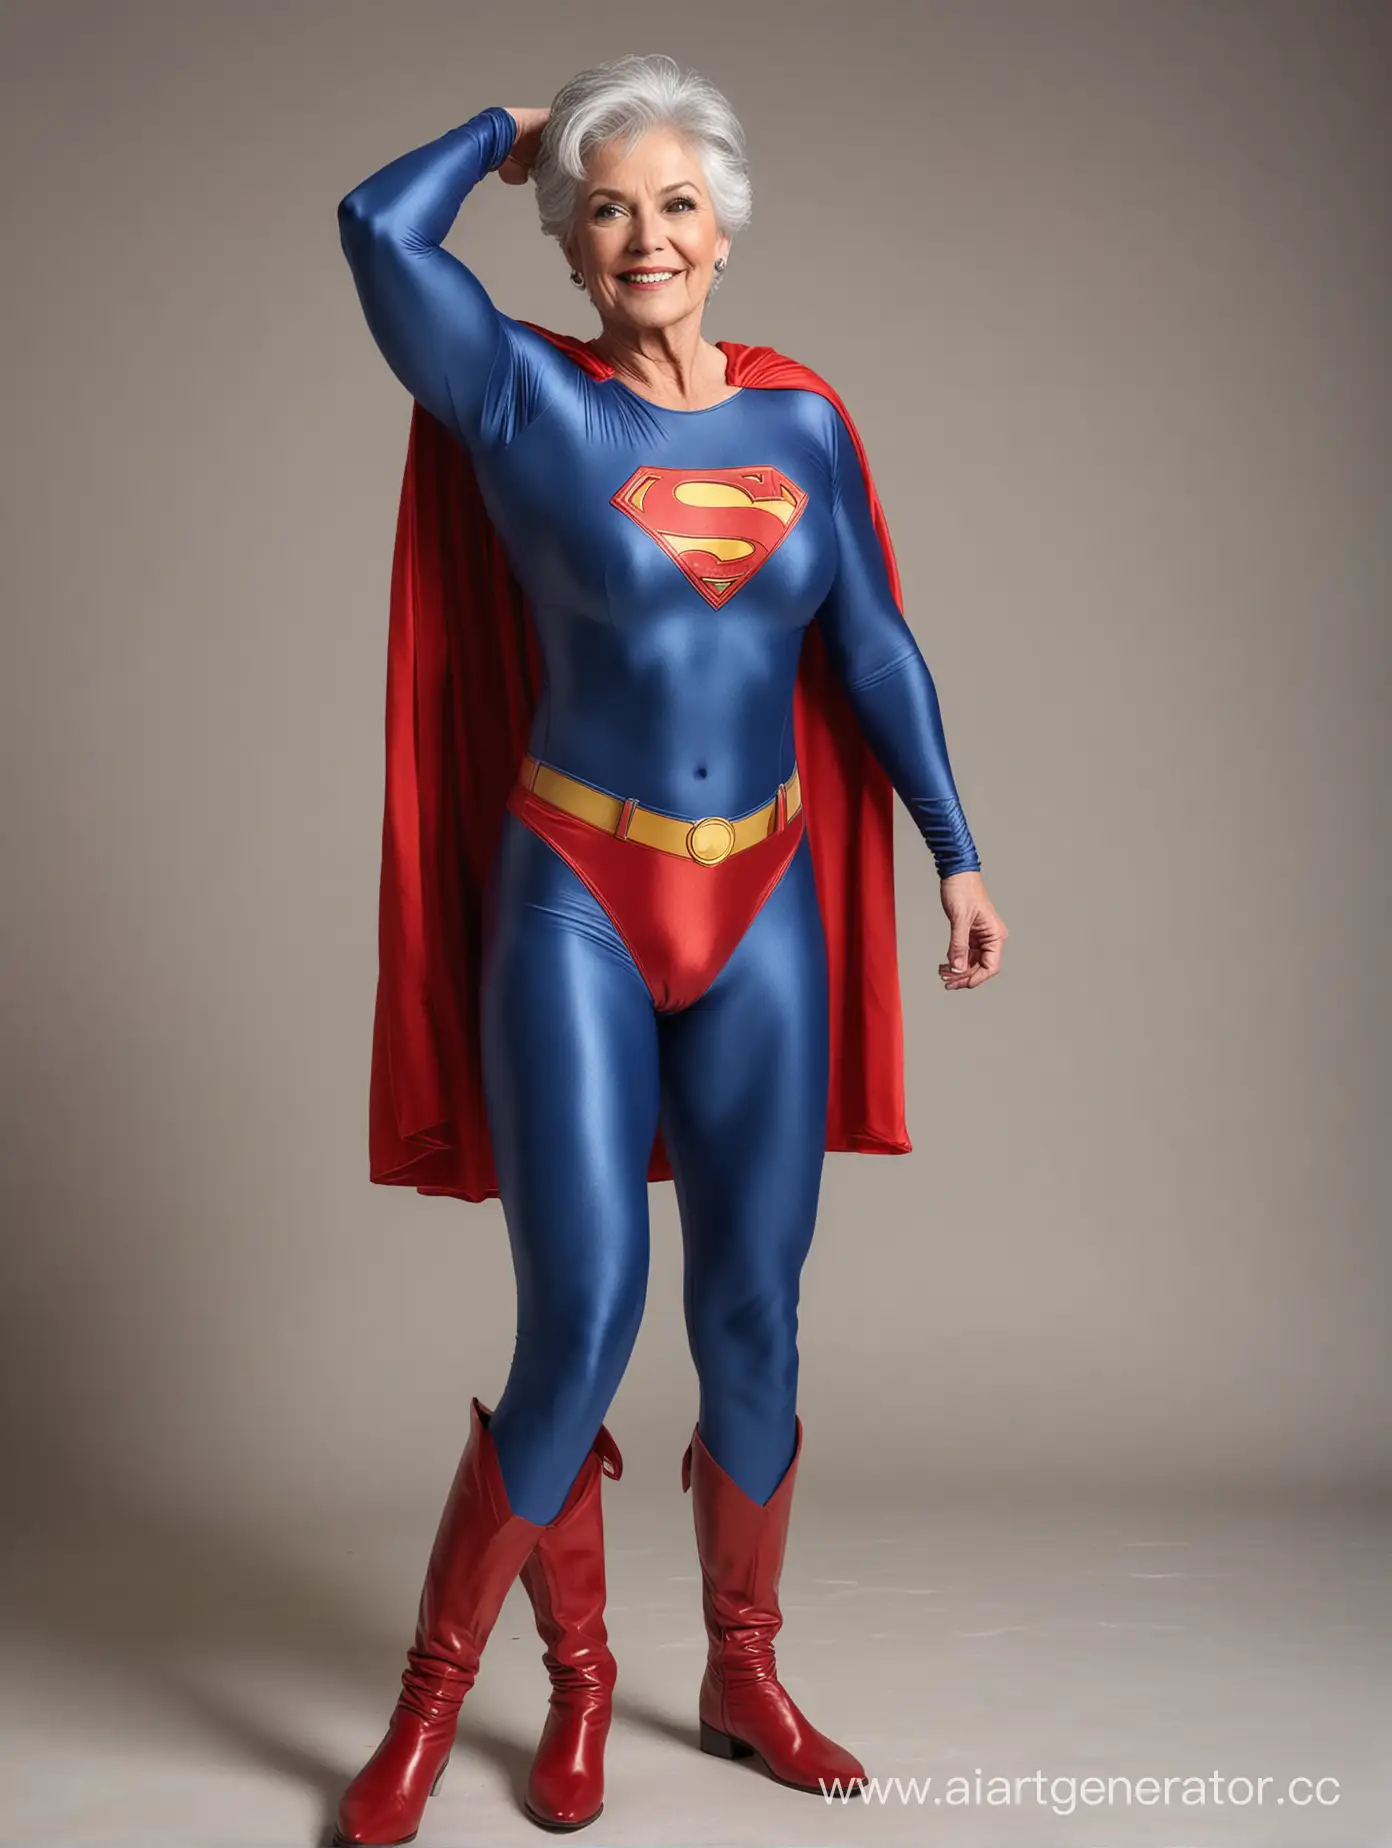 A pretty woman with gray hair, age 70, she is confident and proud, her body is very muscular, she is flexing her enormous arms muscles, she is wearing the classic Superman costume, blue spandex leggings, red briefs, red cape, red boots